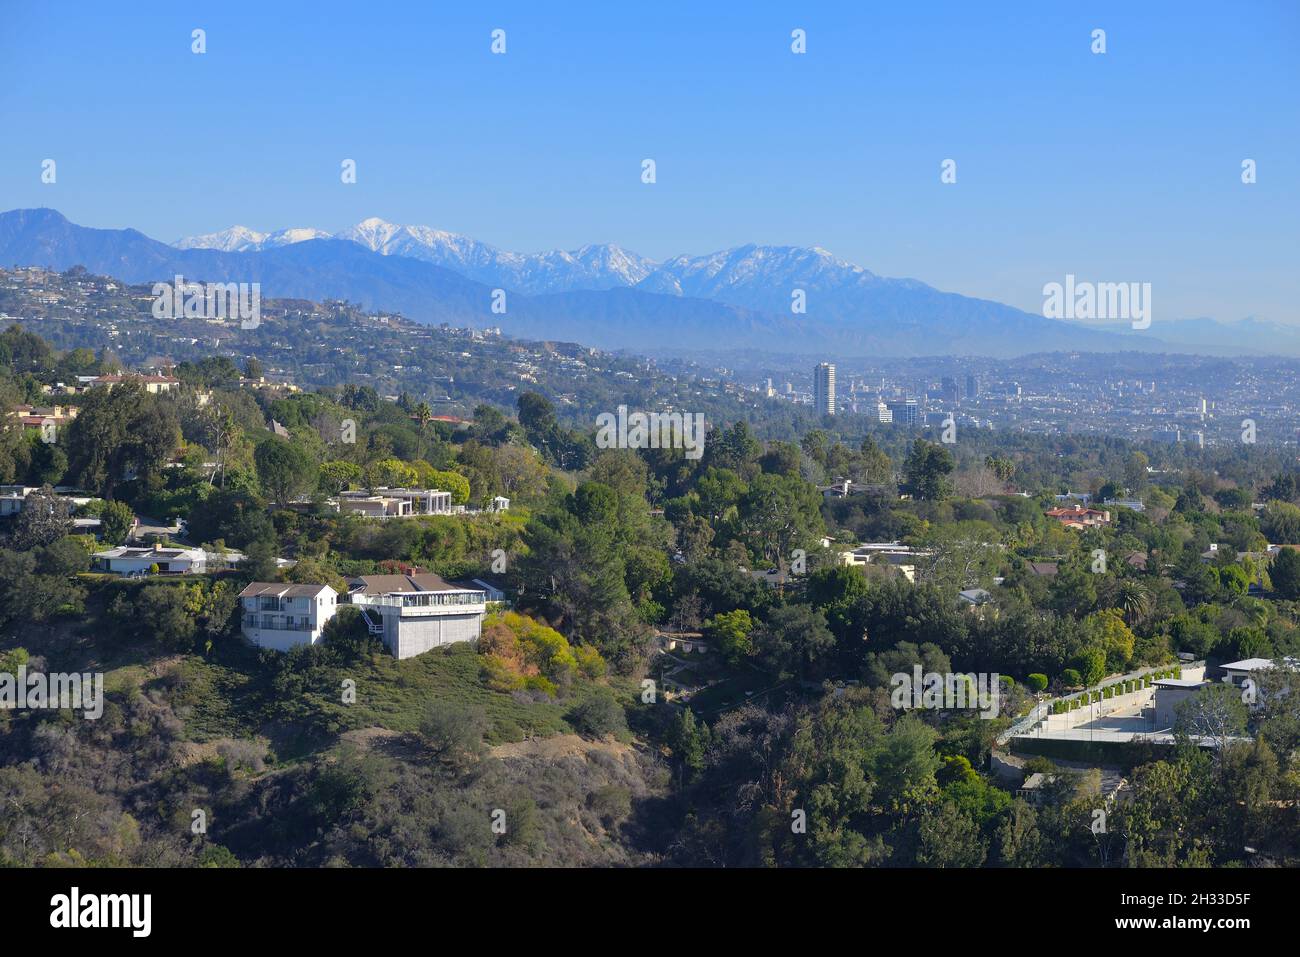 The amazing Getty Center in the Santa Monica mountains overlooking Los Angeles, Brentwood CA Stock Photo